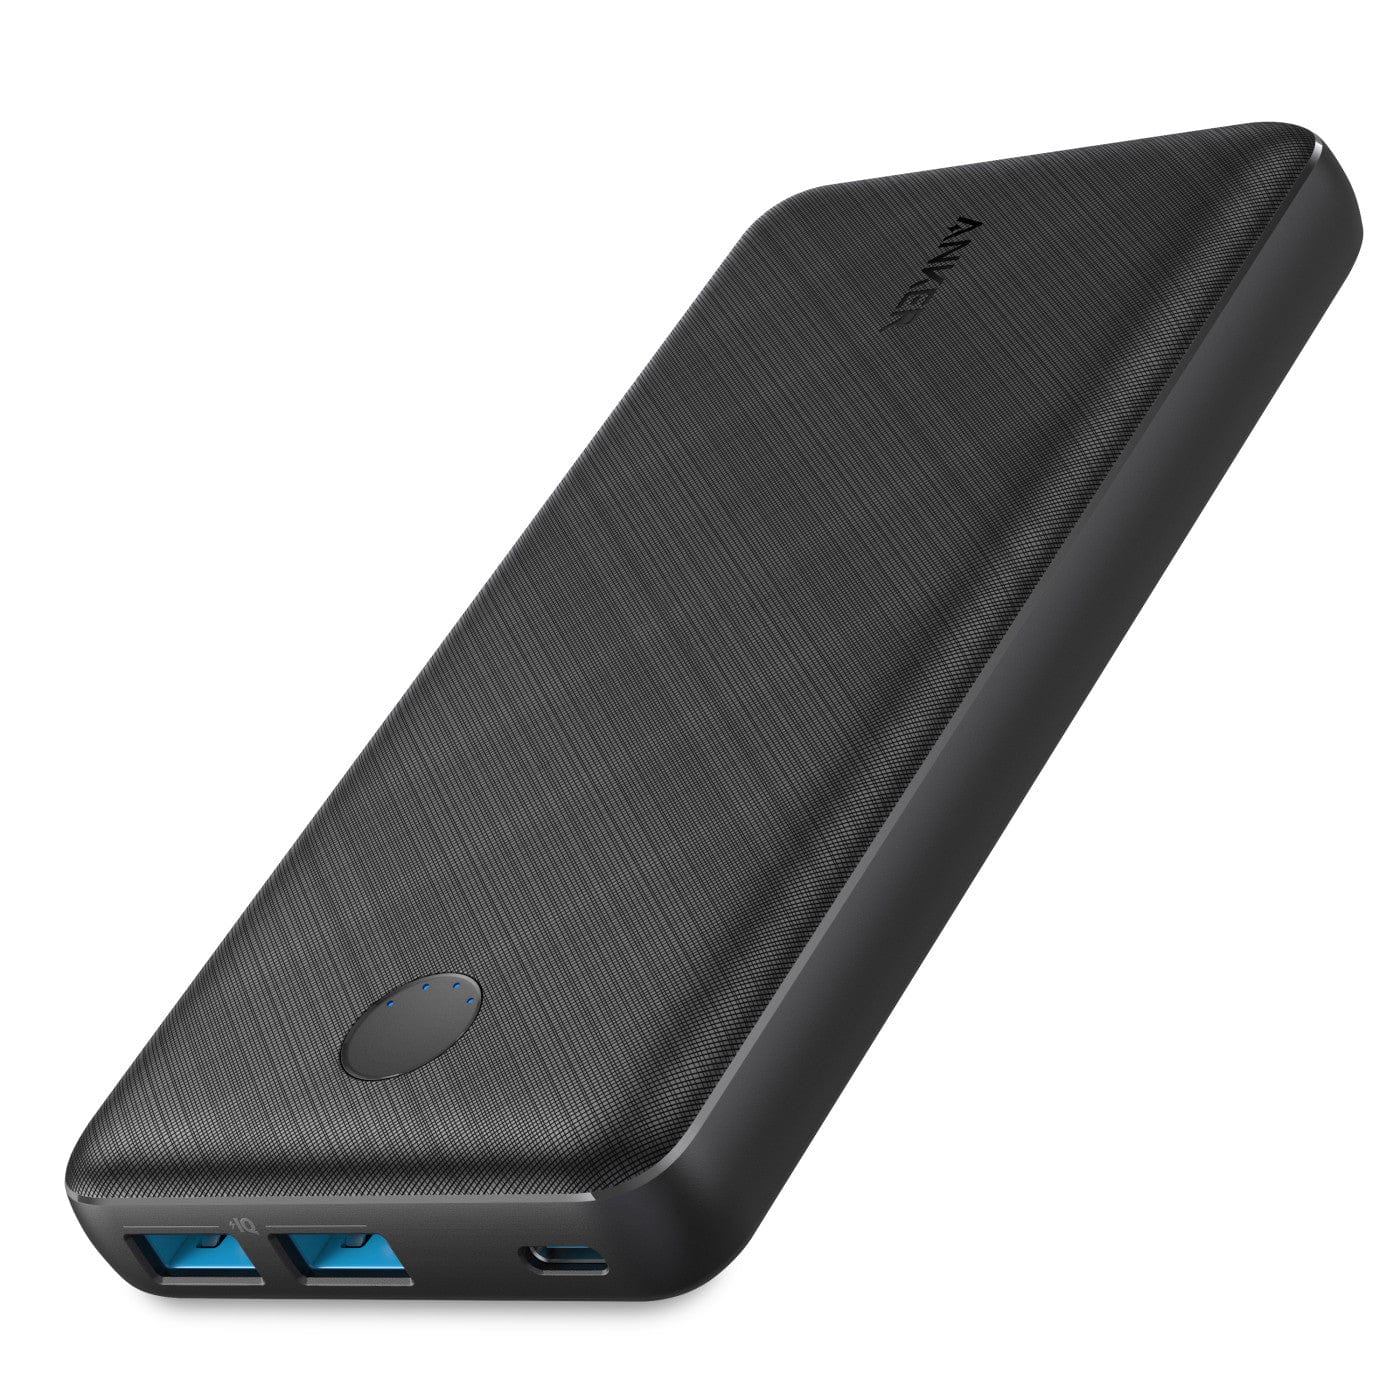 Anker Accessories One Size / Black Anker - PowerCore III 20,000